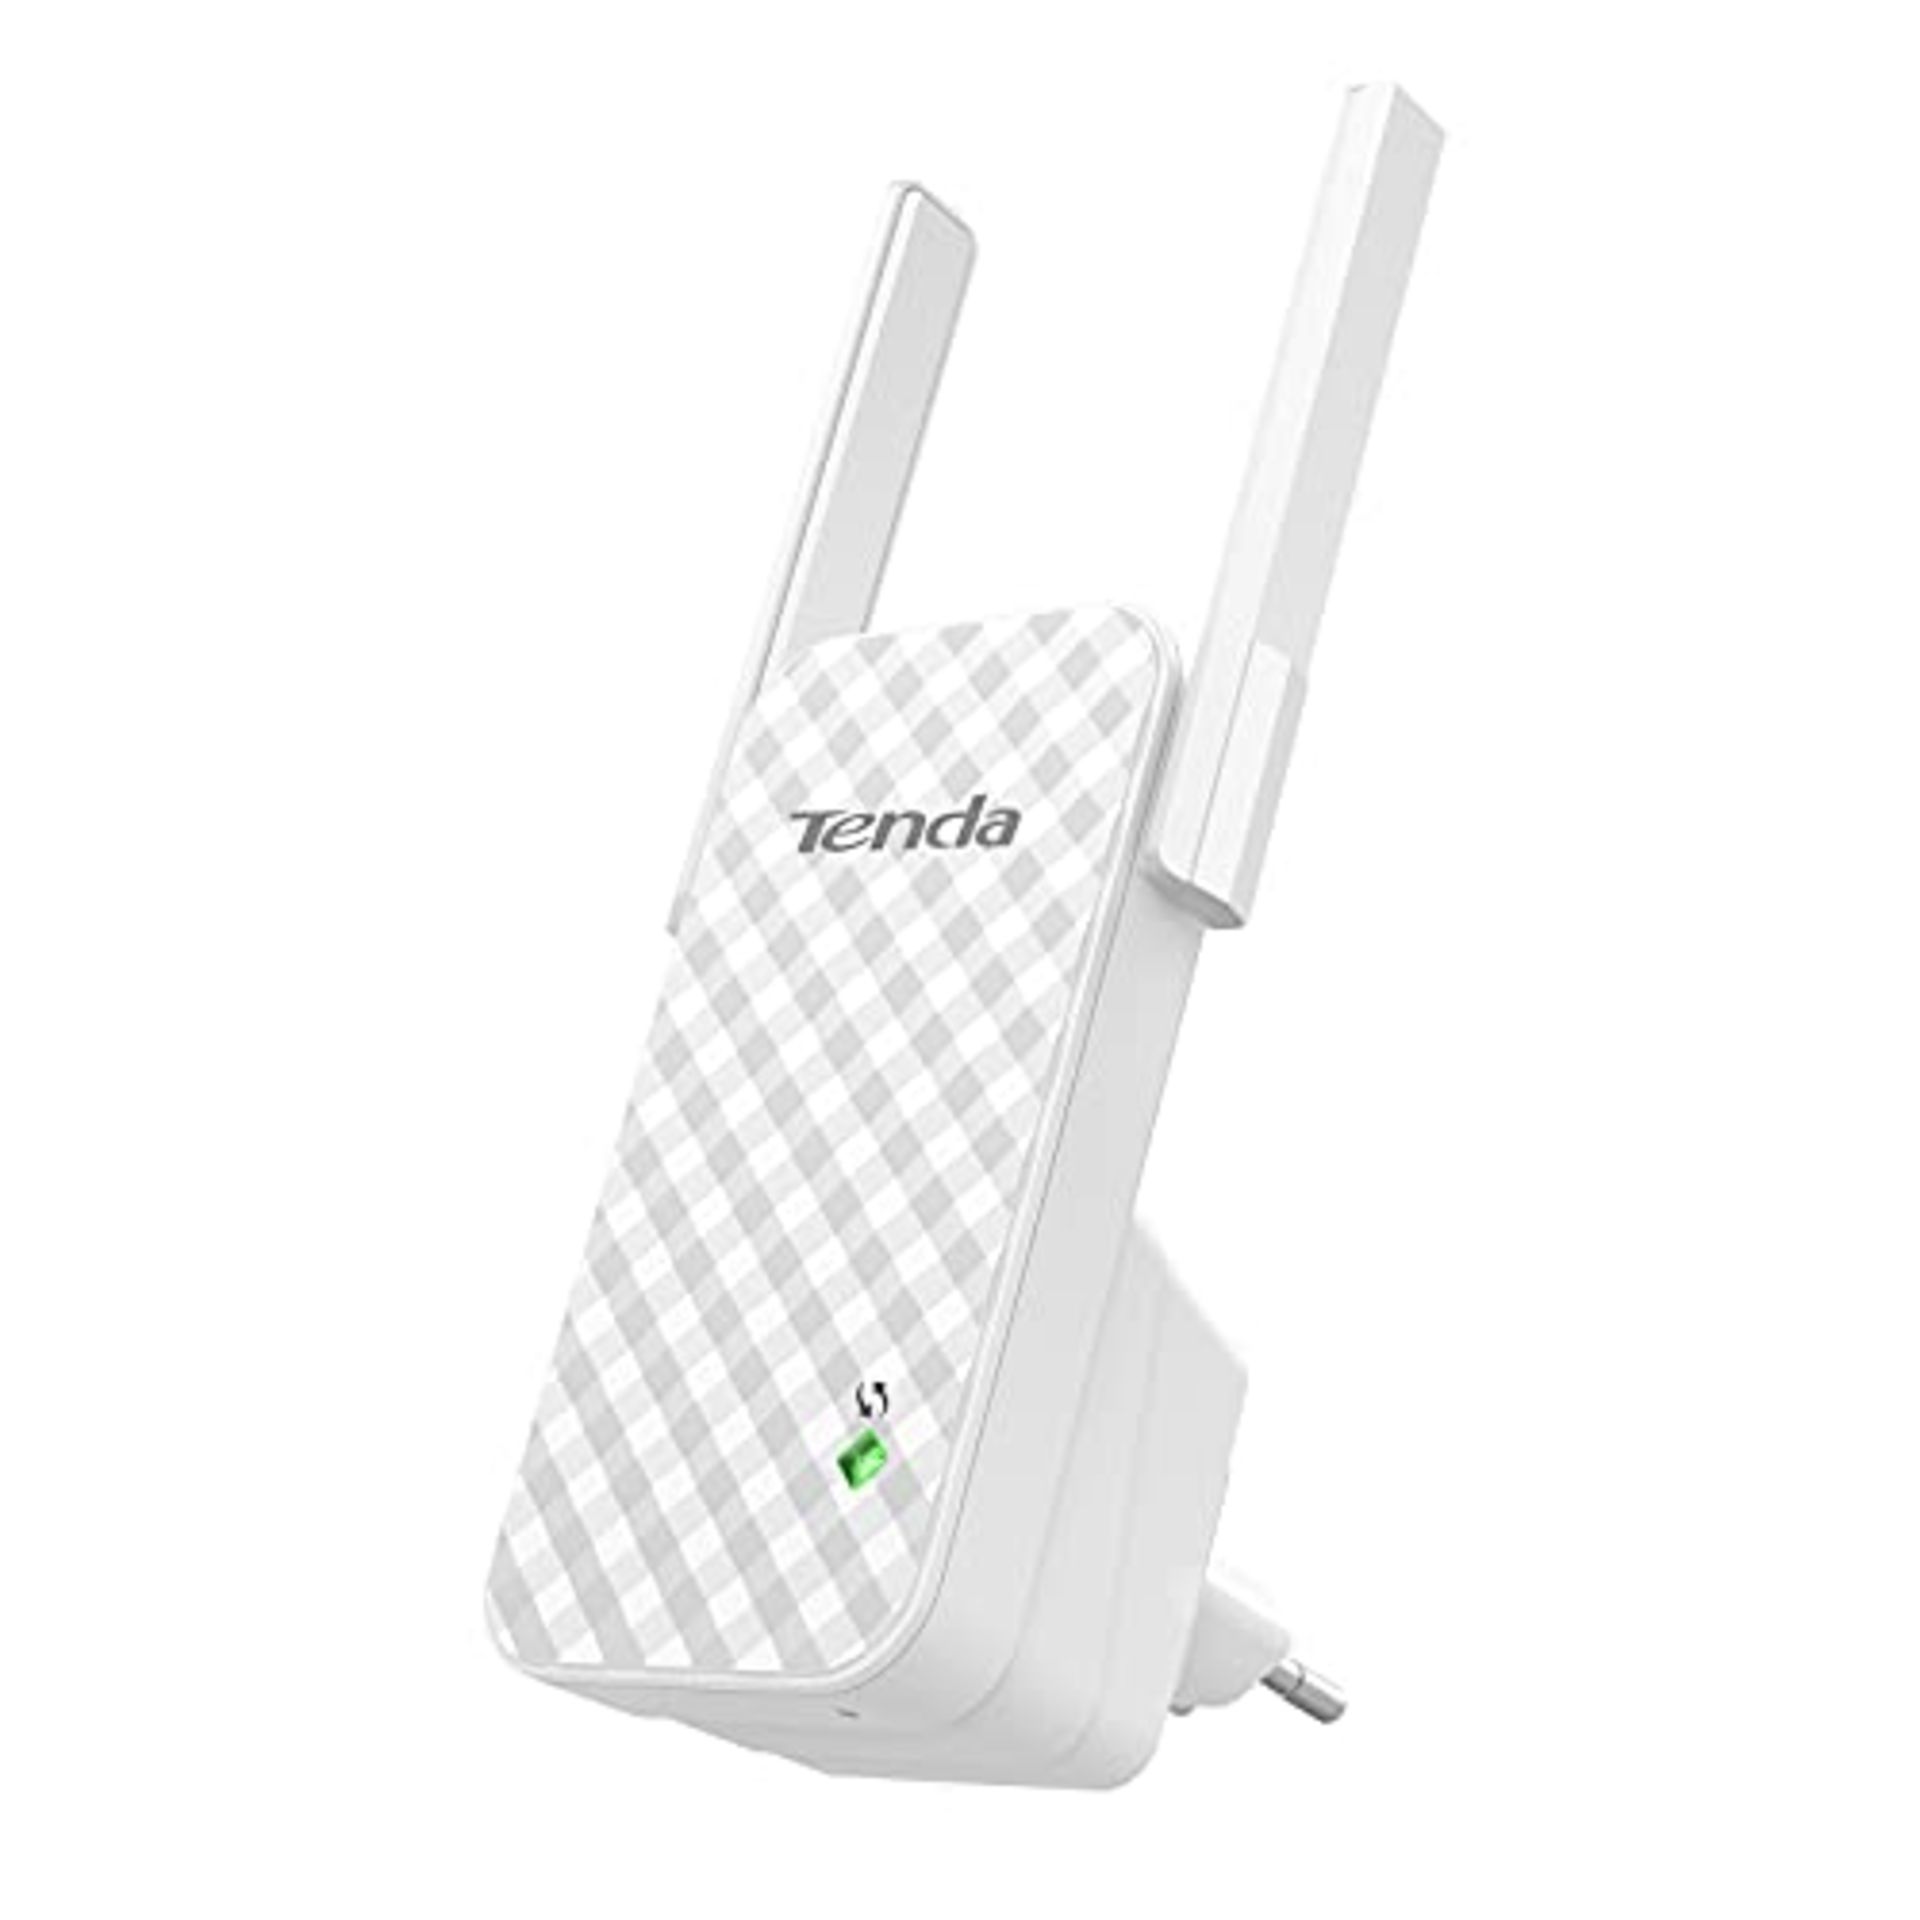 Tenda A9 WiFi Wireless Repeater 300 Mbps, Access Point and Universal Range Extender St